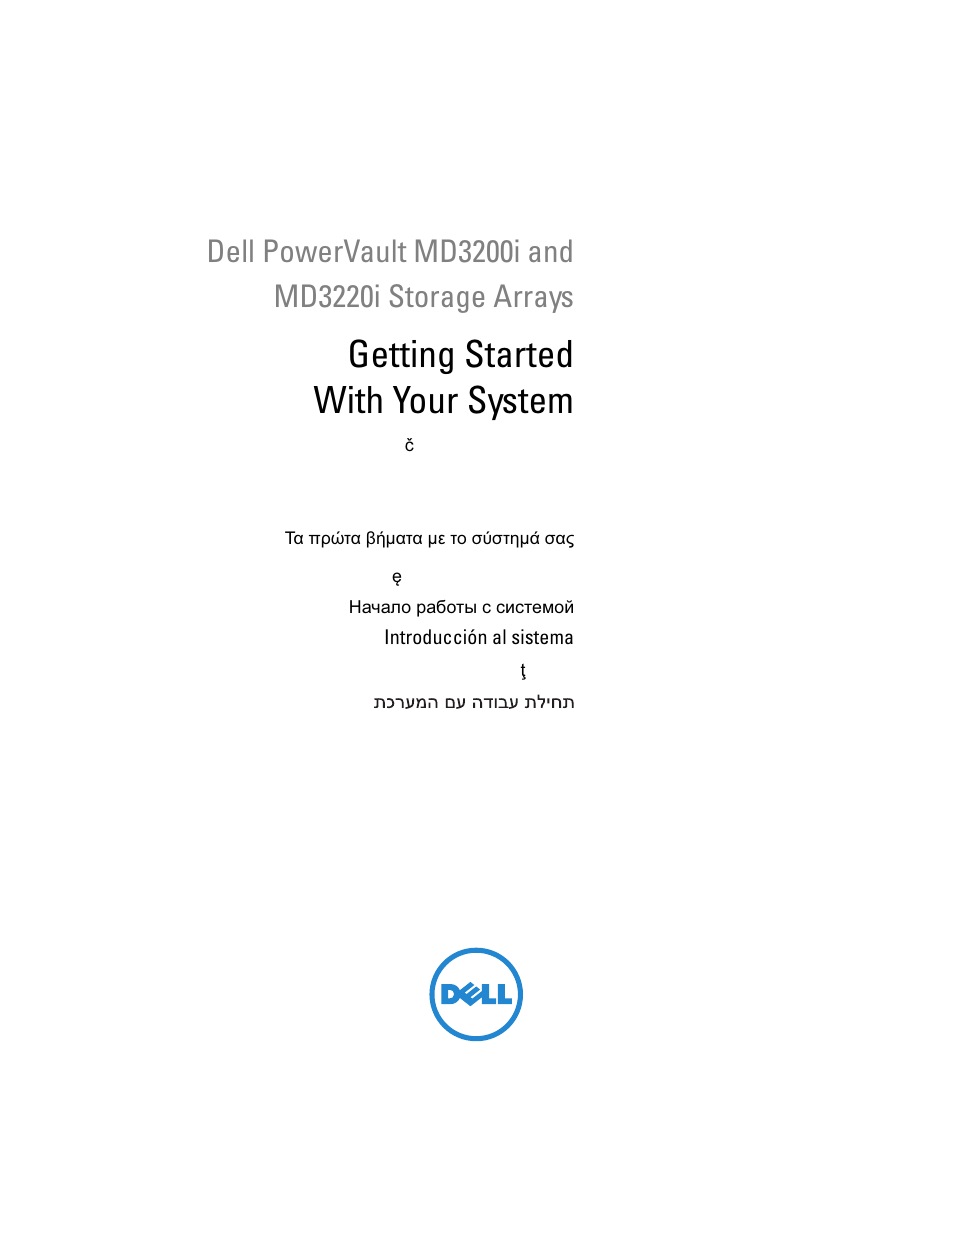 Dell PowerVault MD3220i User Manual | 222 pages